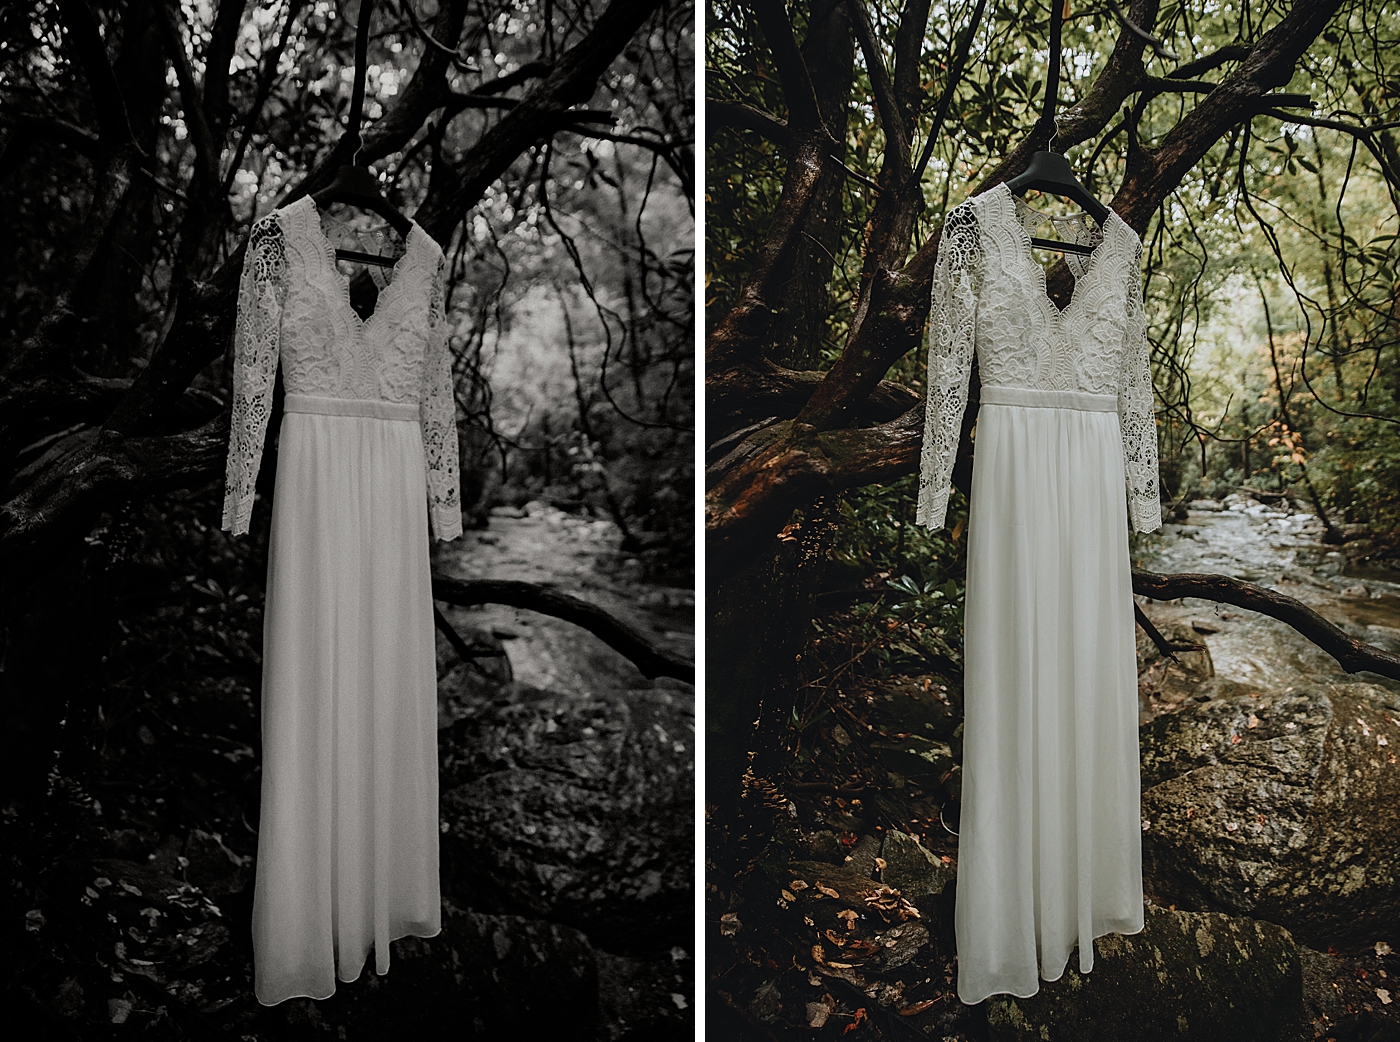 Wedding dress hanging on tree in green forest Catawba Falls Asheville, NC Elopement Photography captured by Maggie Alvarez Photography